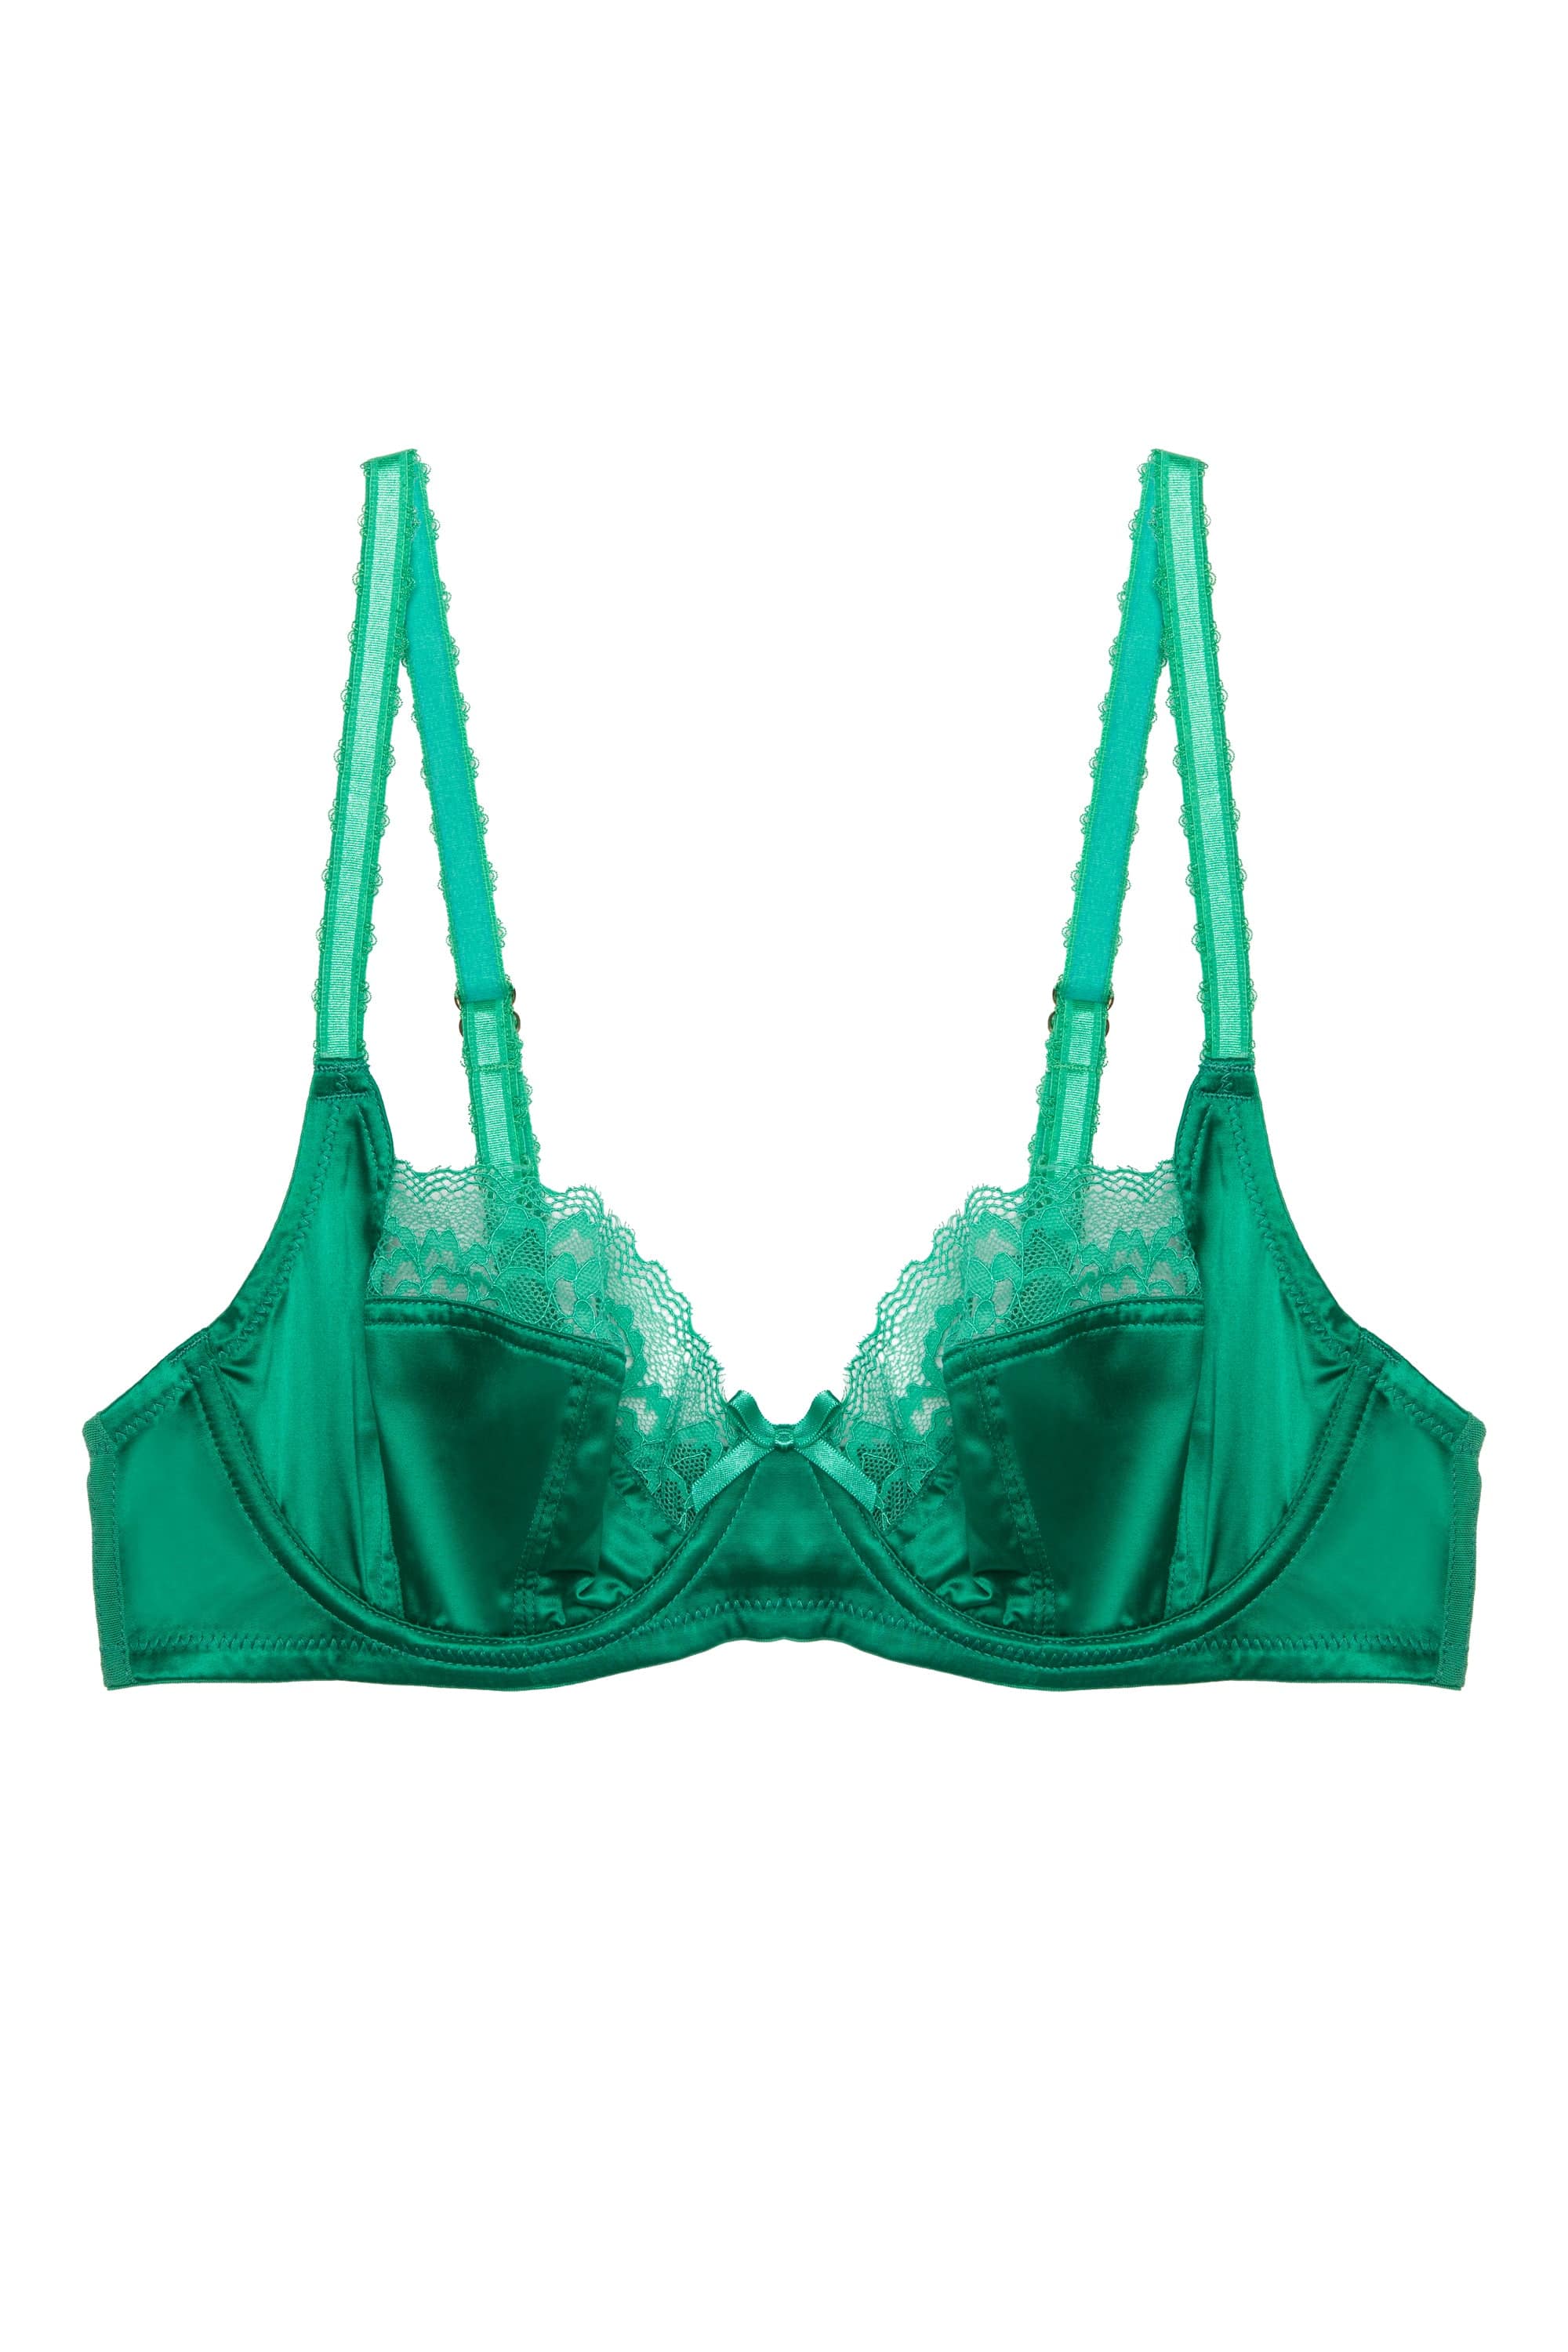 Rosalyn Emerald Satin and Lace Brazilian Brief - sizes 4-16